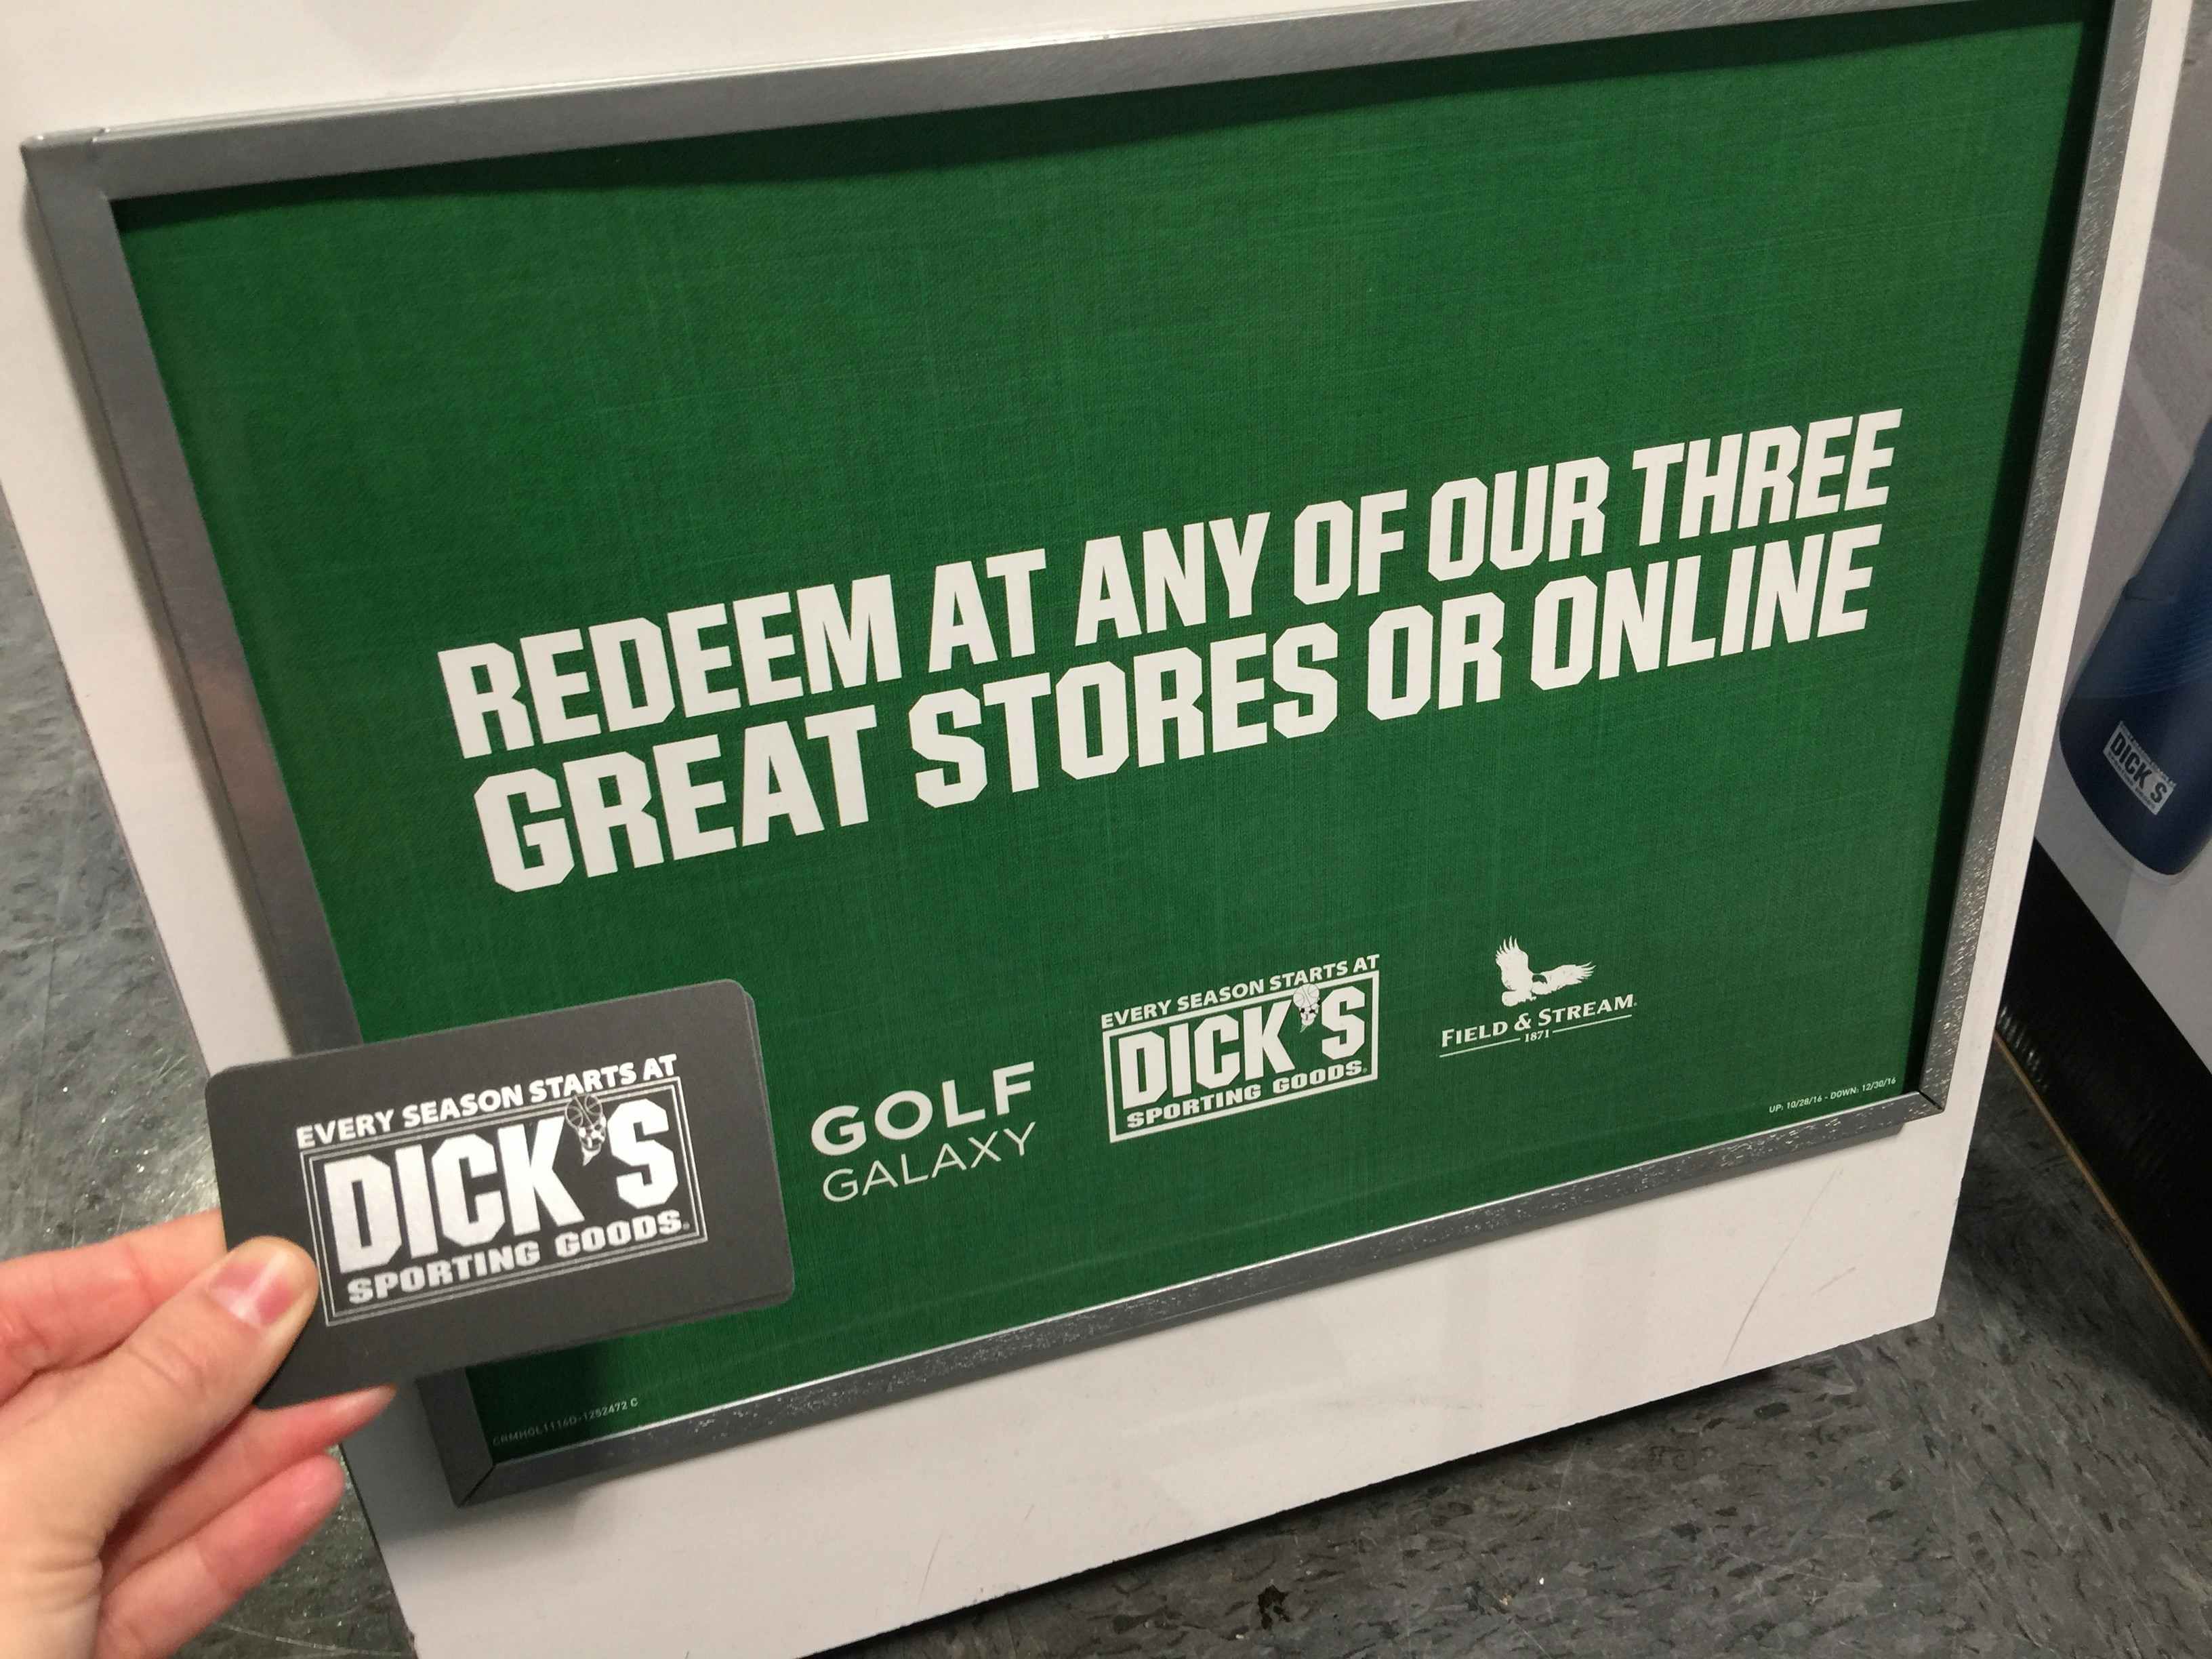 A person's hand holding a Dick's Sporting Goods gift card in front of a sign that reads "Redeem at any of our three great stores or onlin...